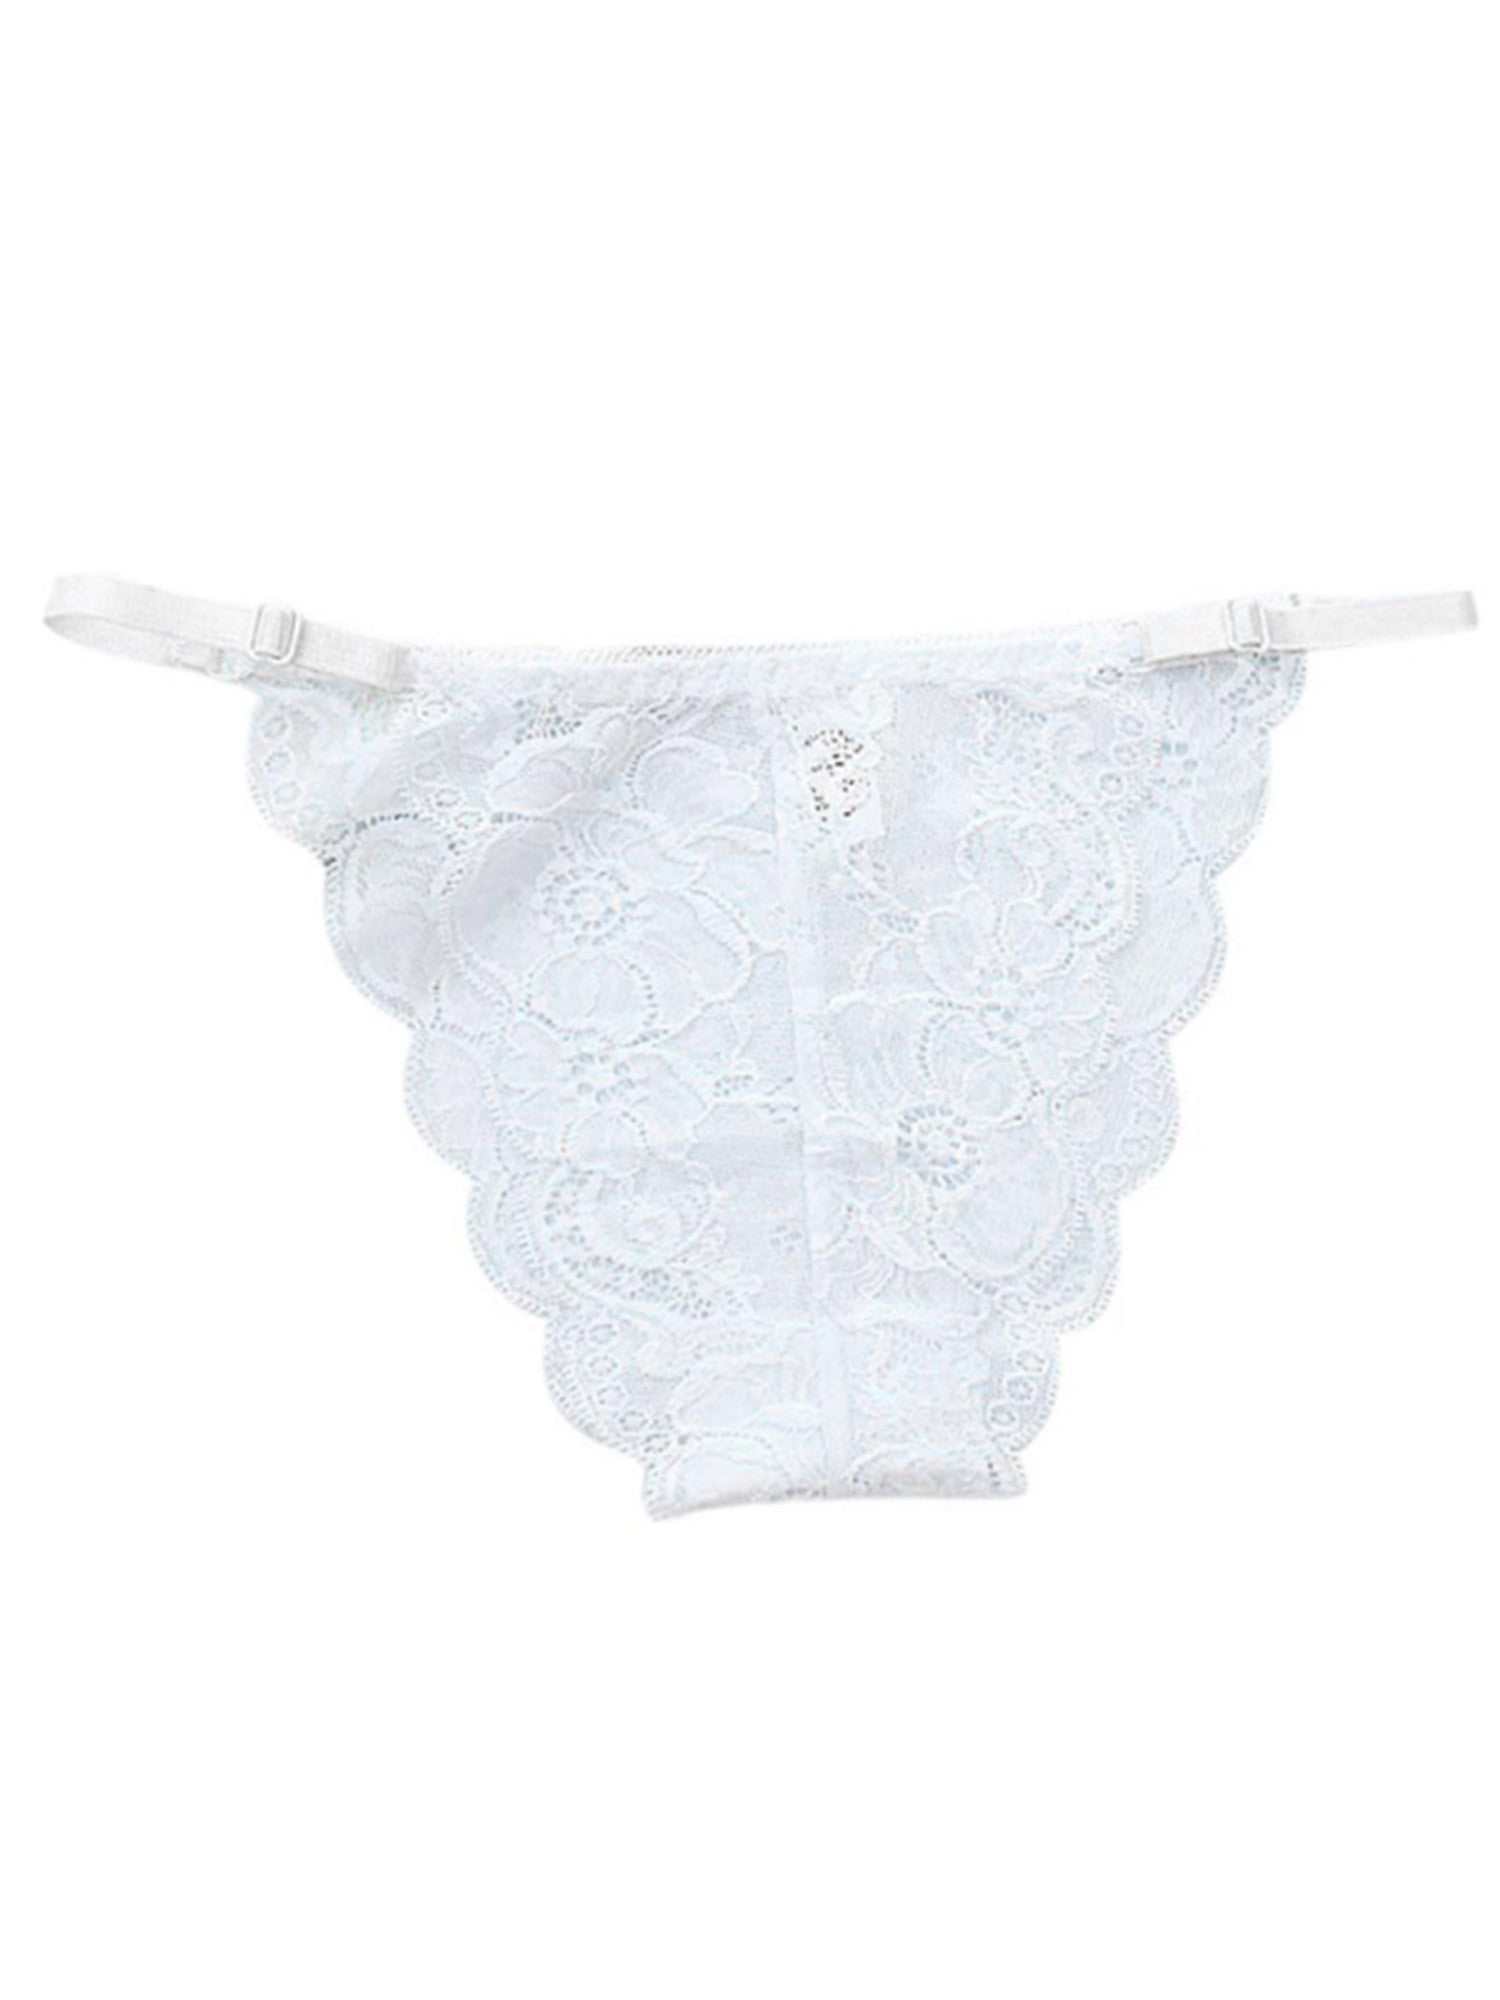 Ochine Women G-string Panties Low Rise T Back Ultra-Soft See Through Bikini  Bottom Thong Tanga Hipster Briefs Sexy Lingerie with Lace Embroidery 